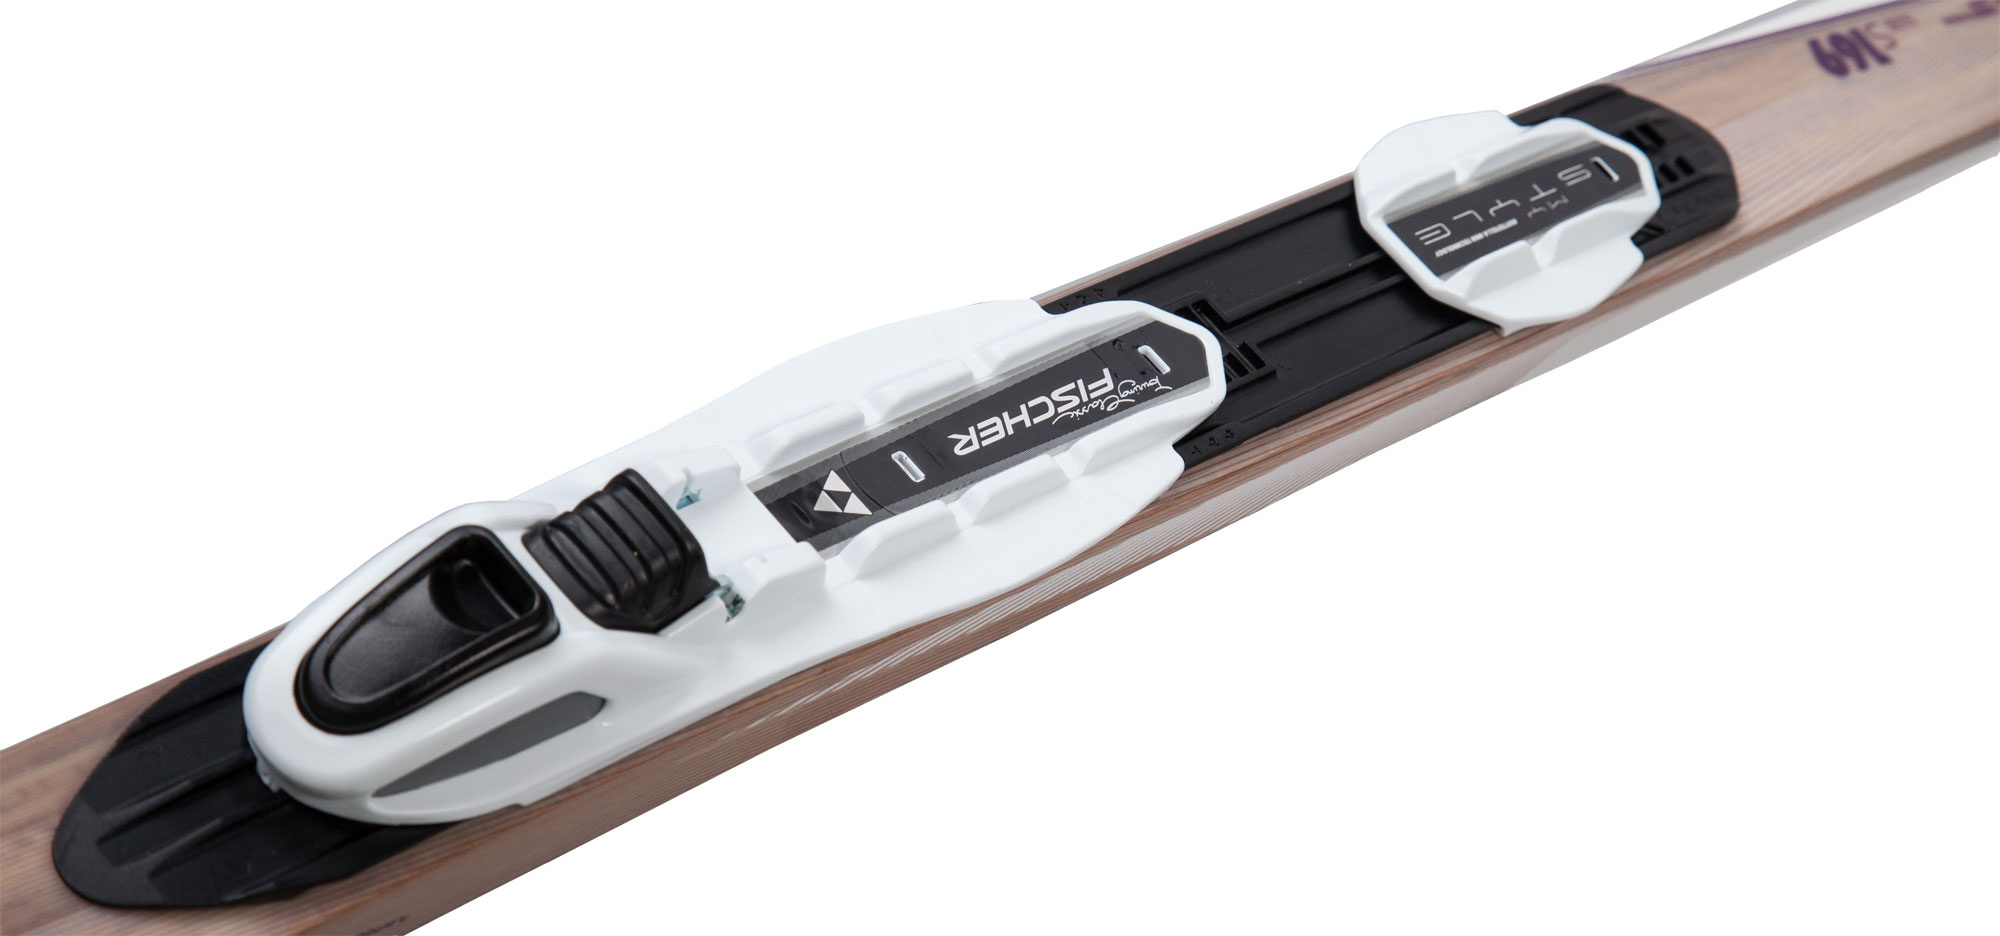 Classic nordic skis with uphill travel support